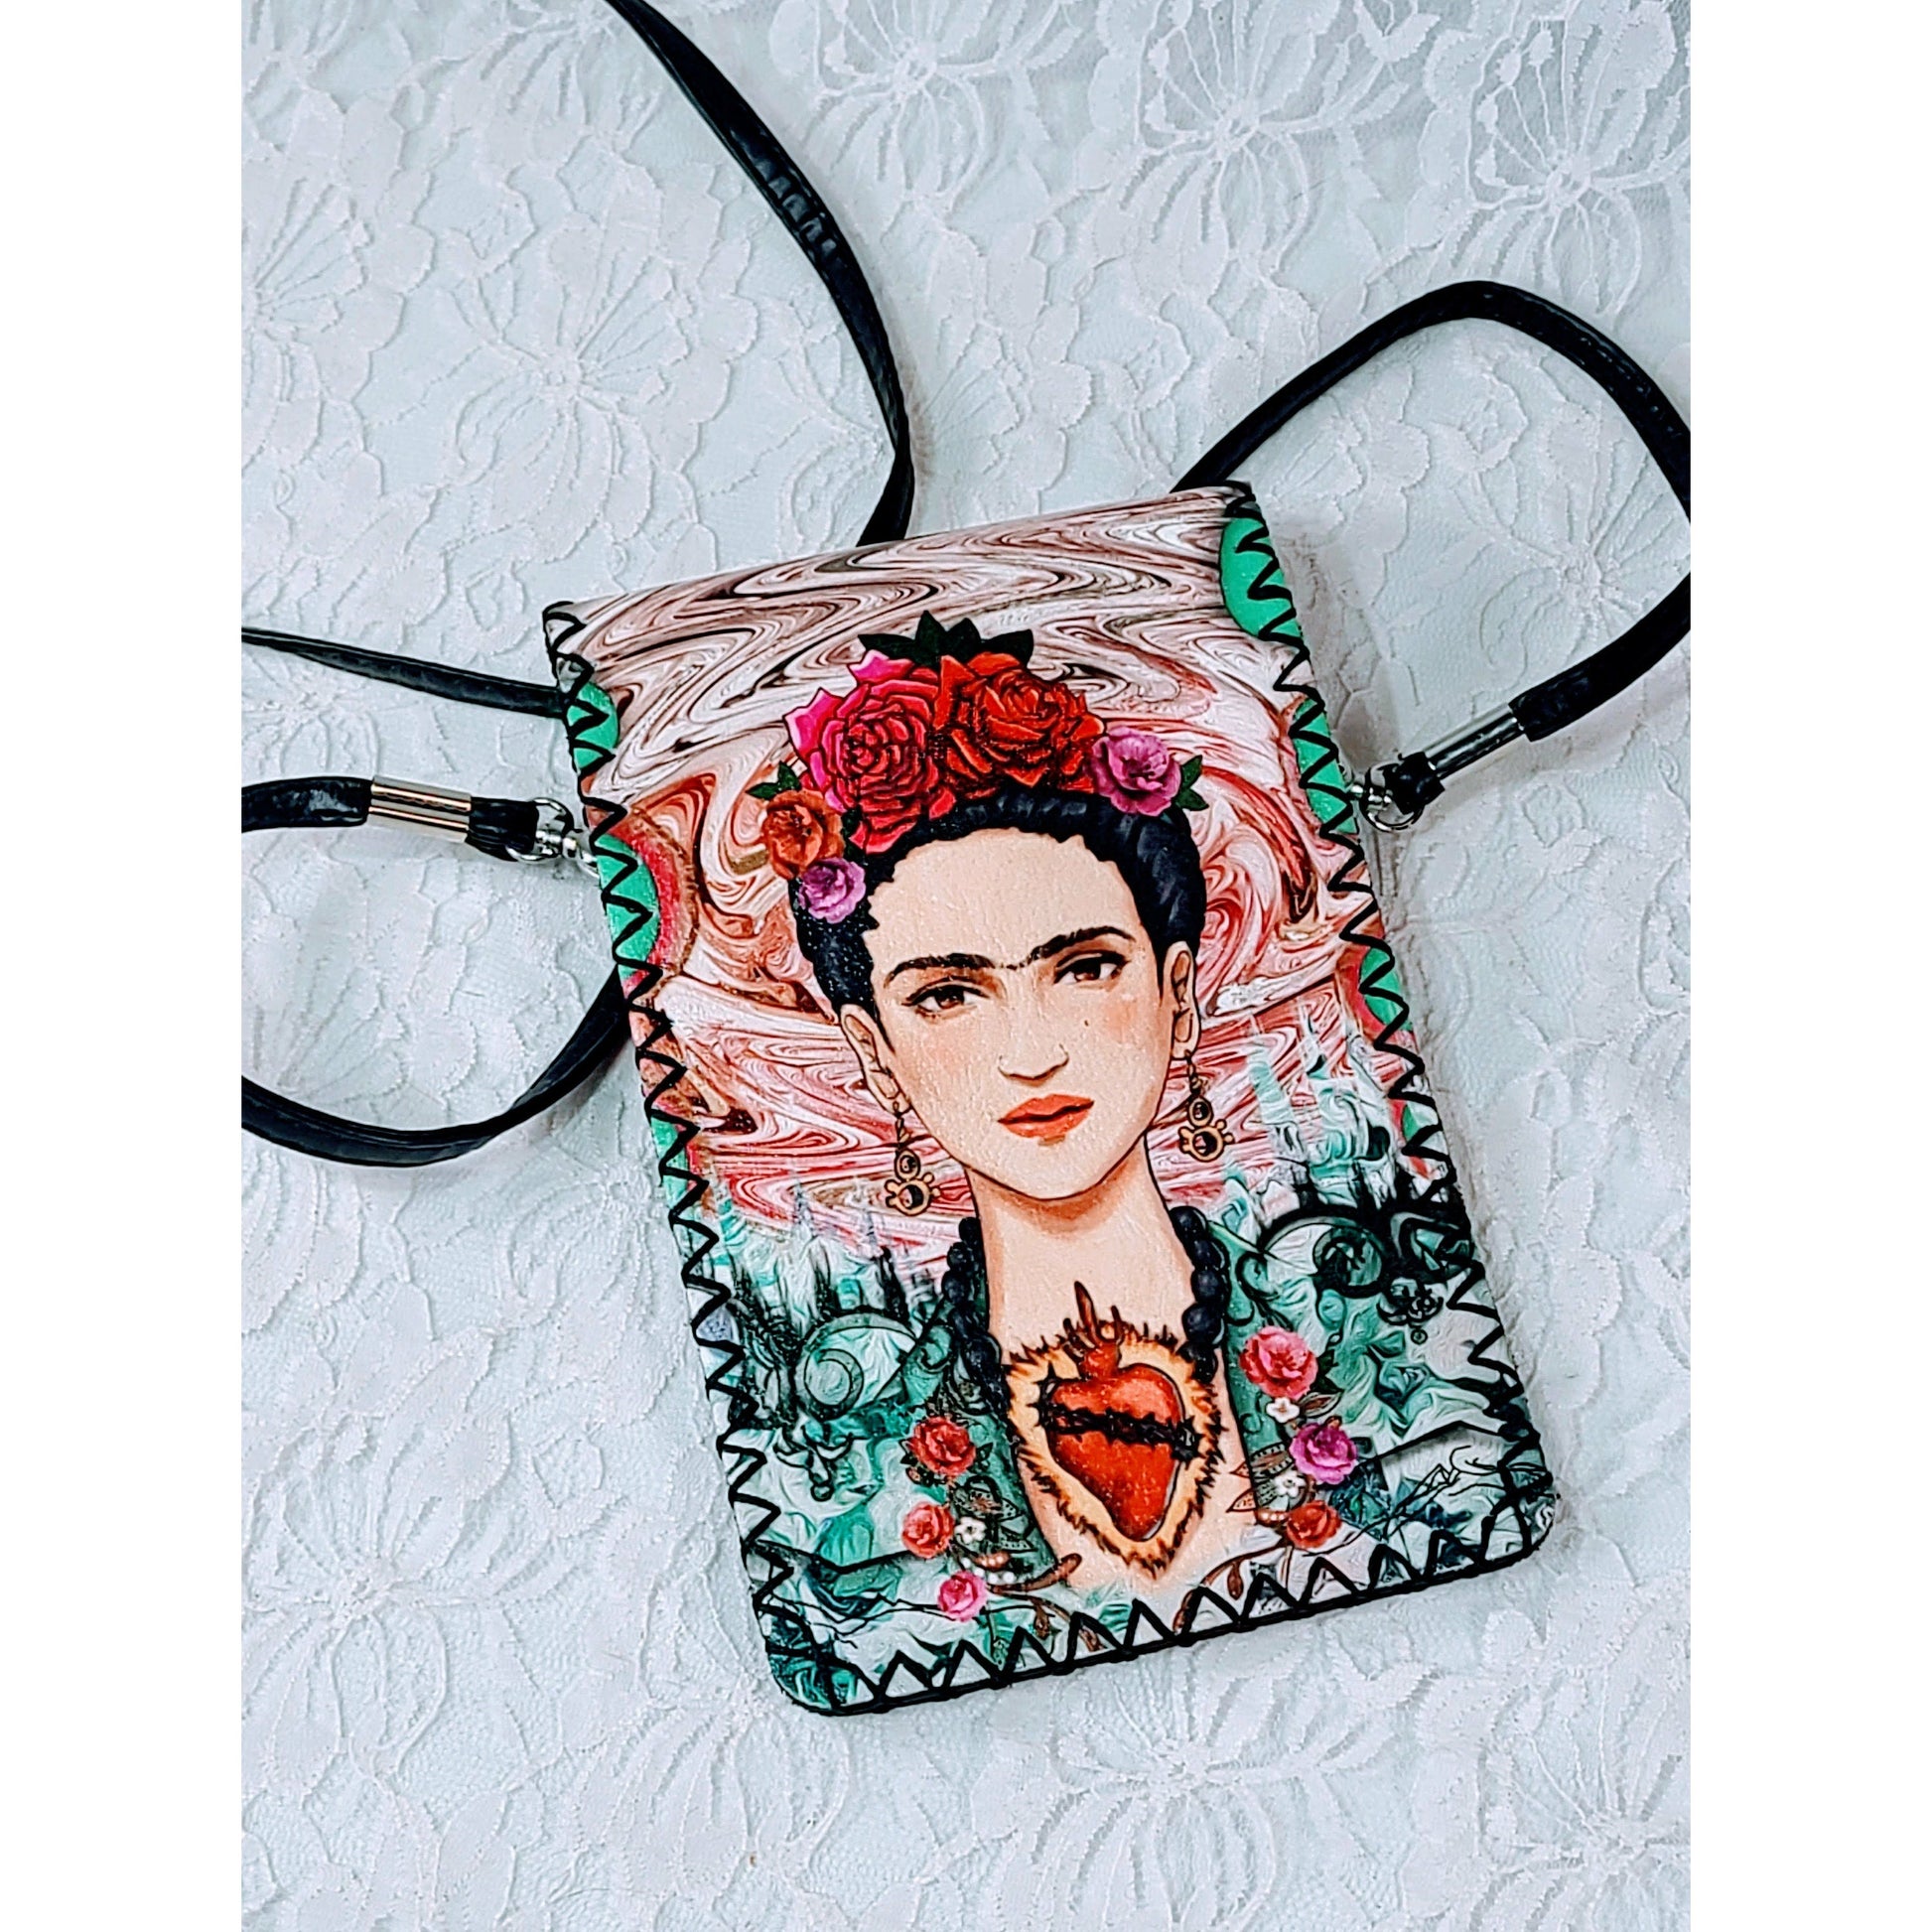 Frida Kahlo Crossbody Genuine Leather Purse Handbag Hand Stitched PERFECT for Phone and Wallet